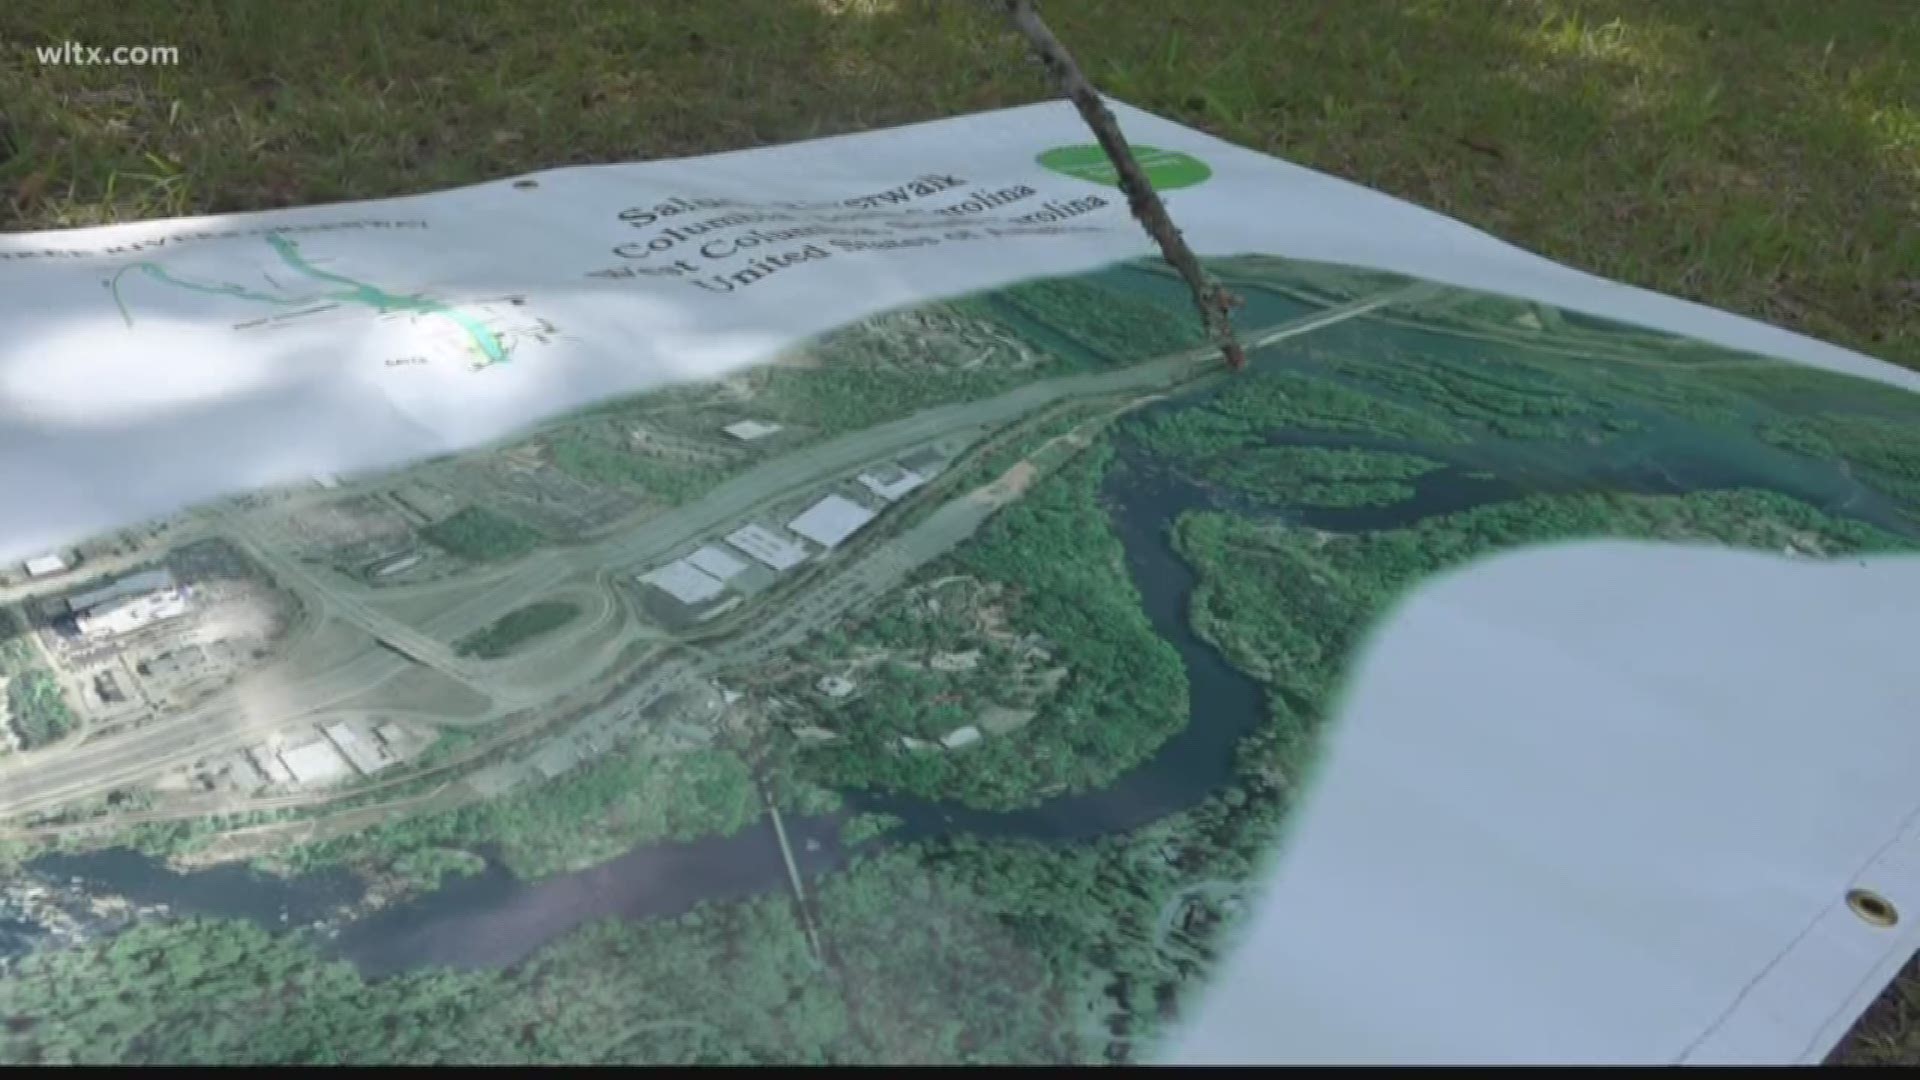 The River Alliance has been working to create more public access between the rivers in Columbia, Cayce and West Columbia.	The idea has been around for nearly two decades... and soon vistors will have more winding ways to walk through and experience natur